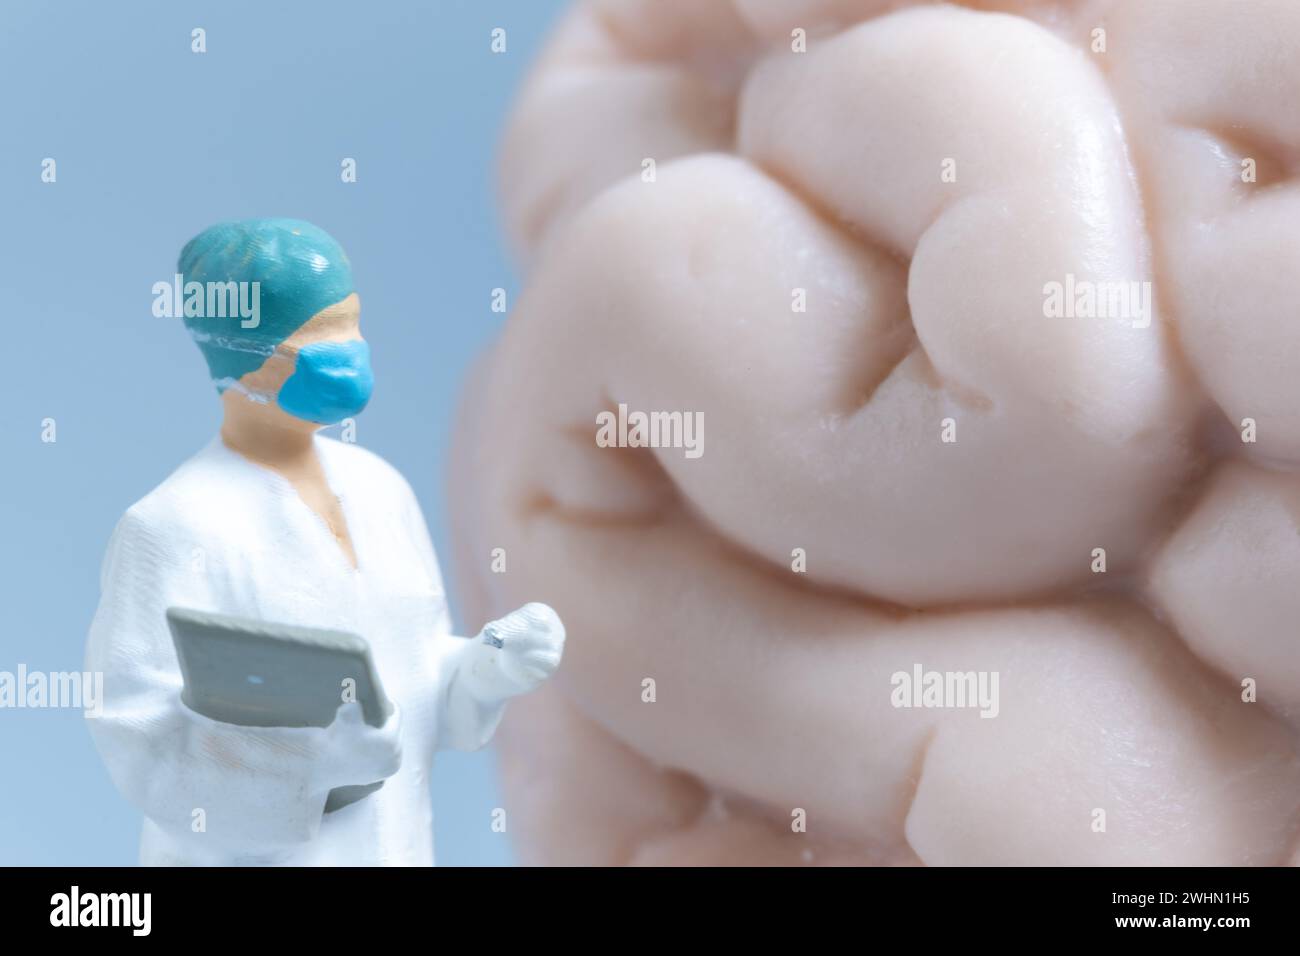 Miniature people Doctor examining The gastrointestinal tract.  Medical treatment of intestinal diseases Stock Photo